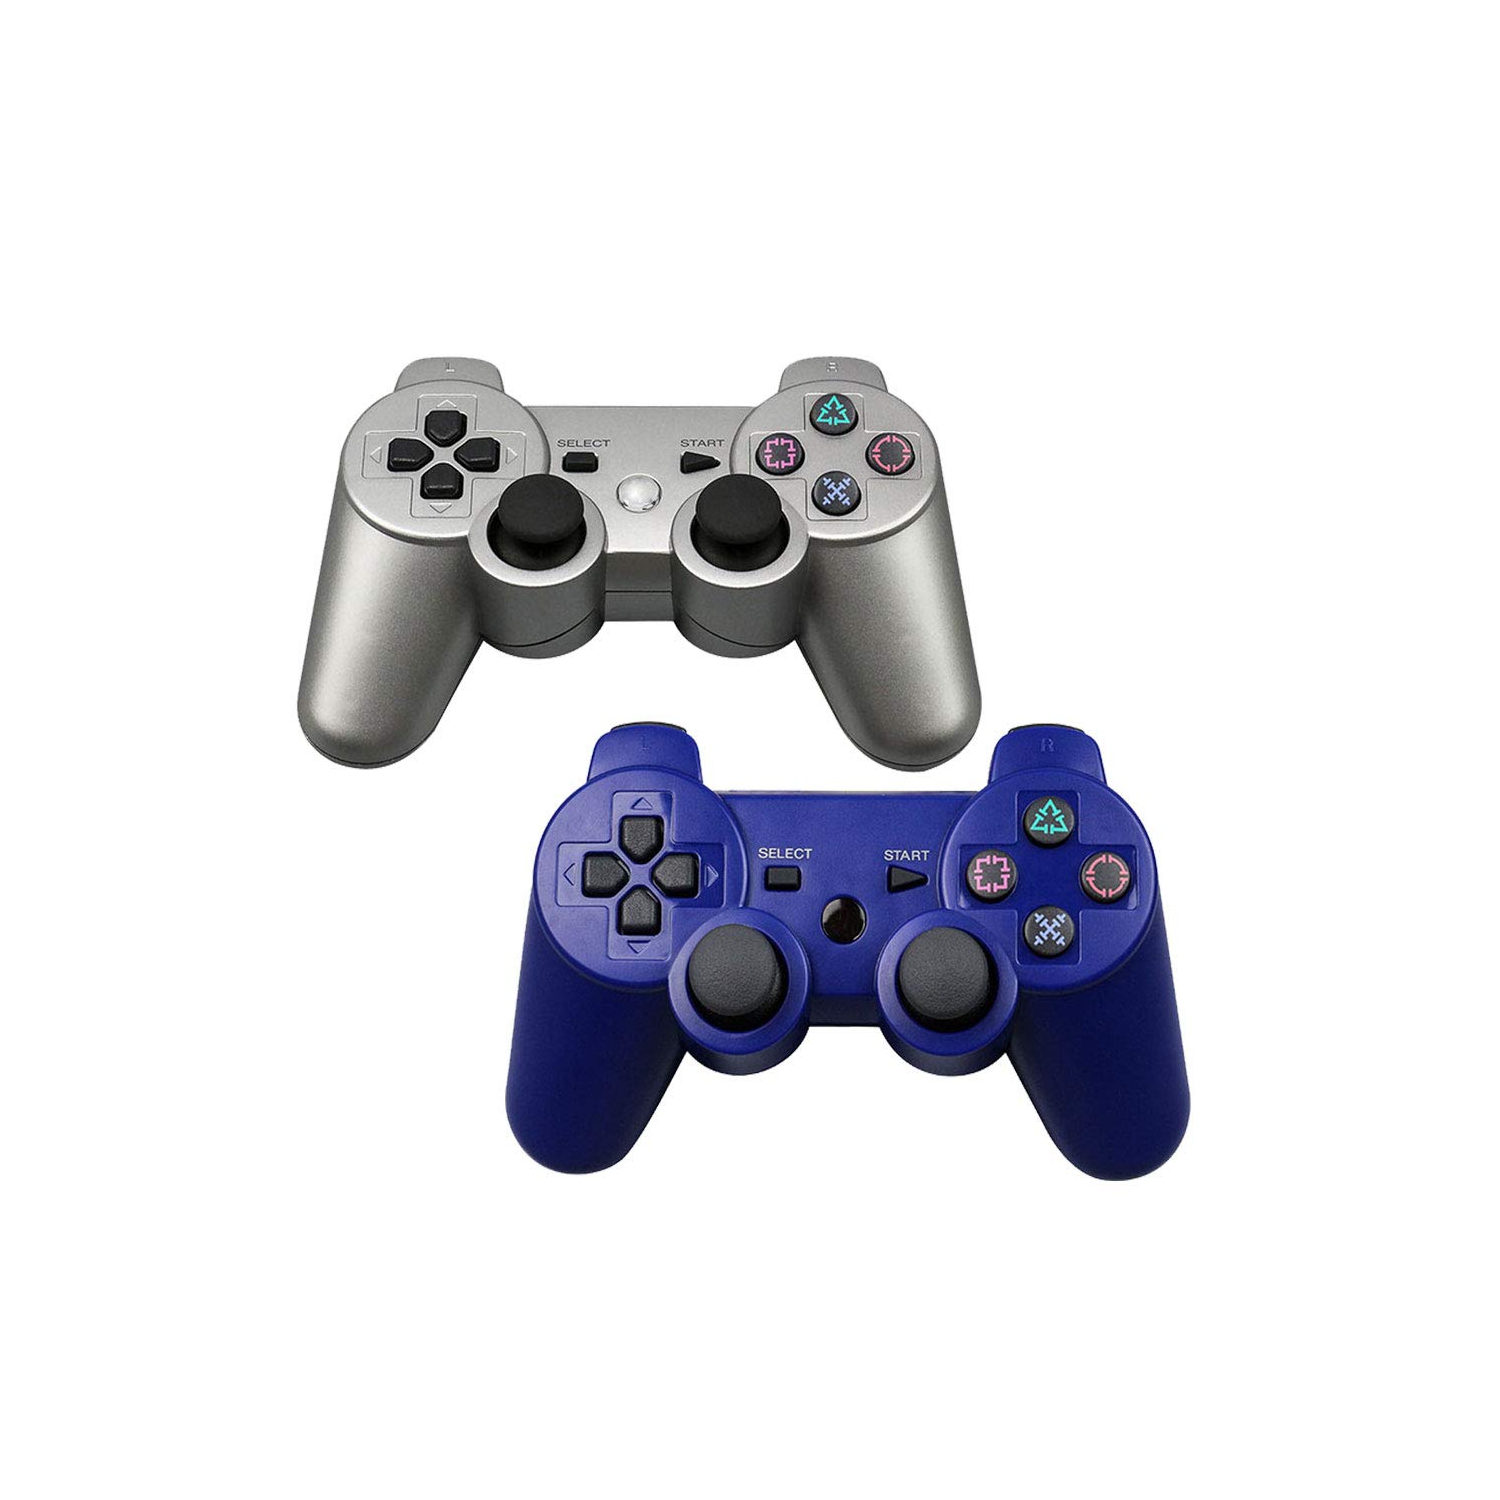 PS3 Controller 2 Pack Wireless Bluetooth 6-Axis Gamepad Controllers Compatible for Playstation 3 Dualshock